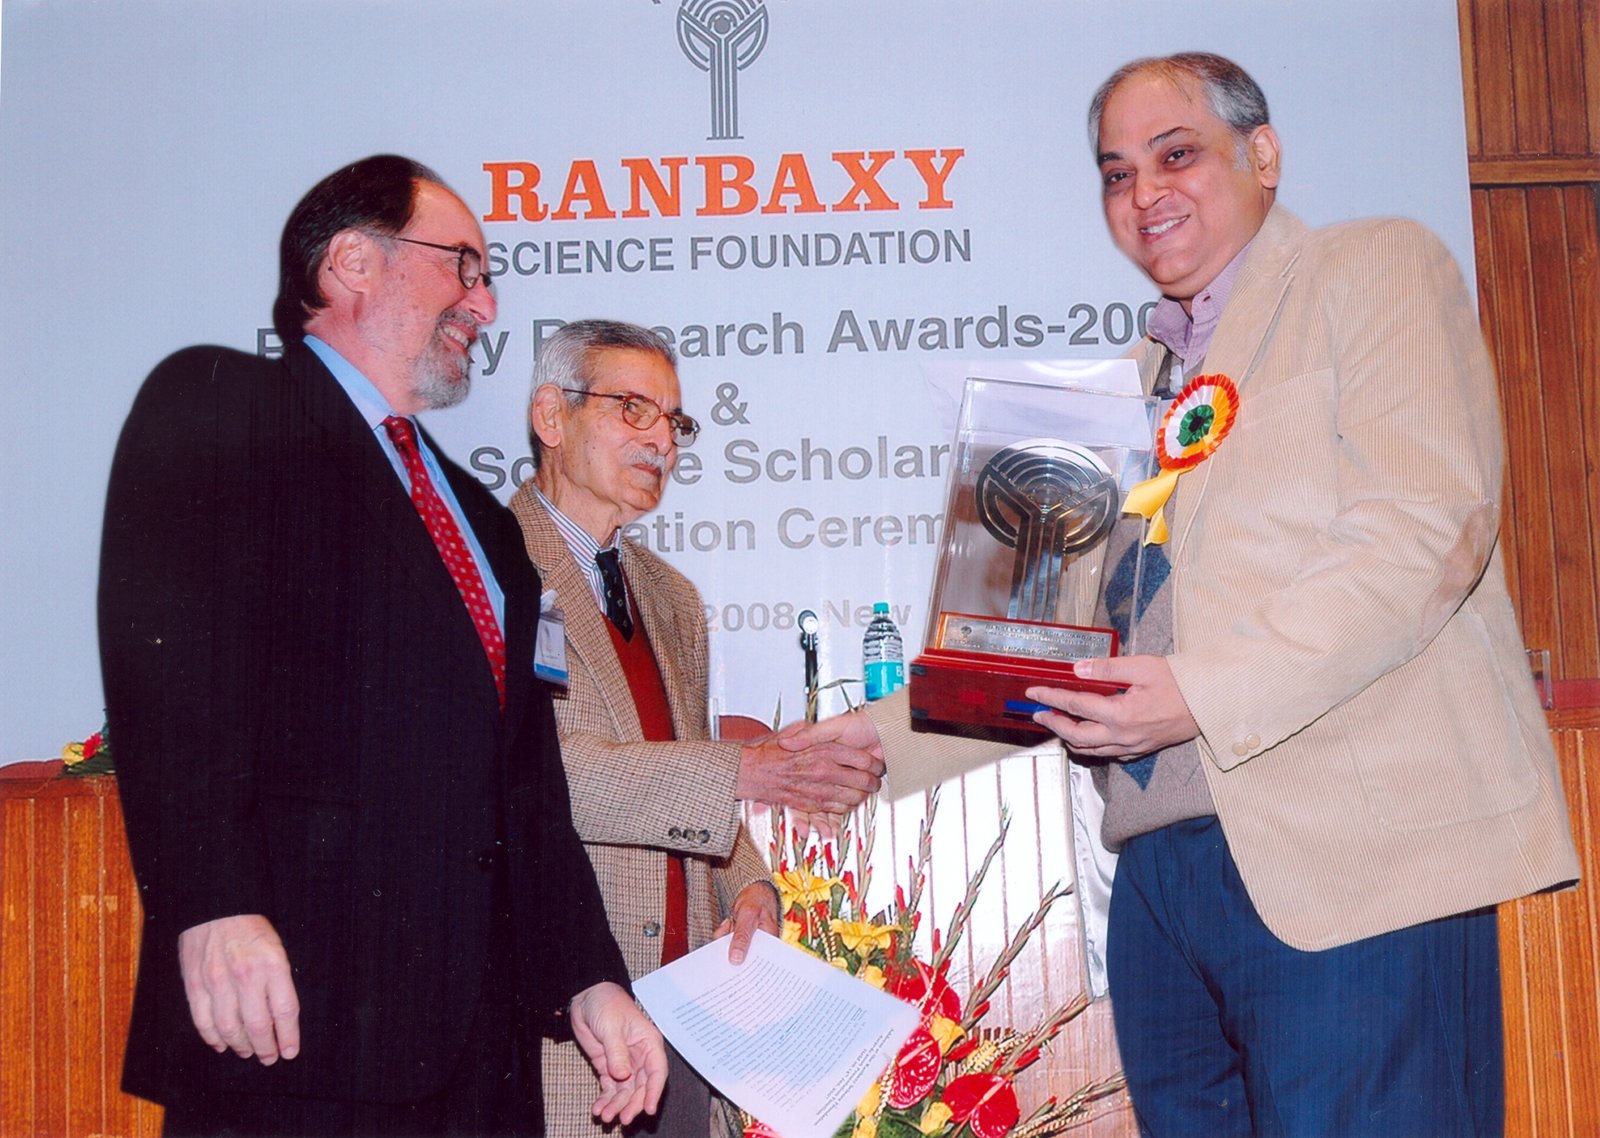 (File Photo) Ranbaxy Science Foundation has been honoring the India's top talent in science each year. This year awards were given to five scientists and five science scholars.